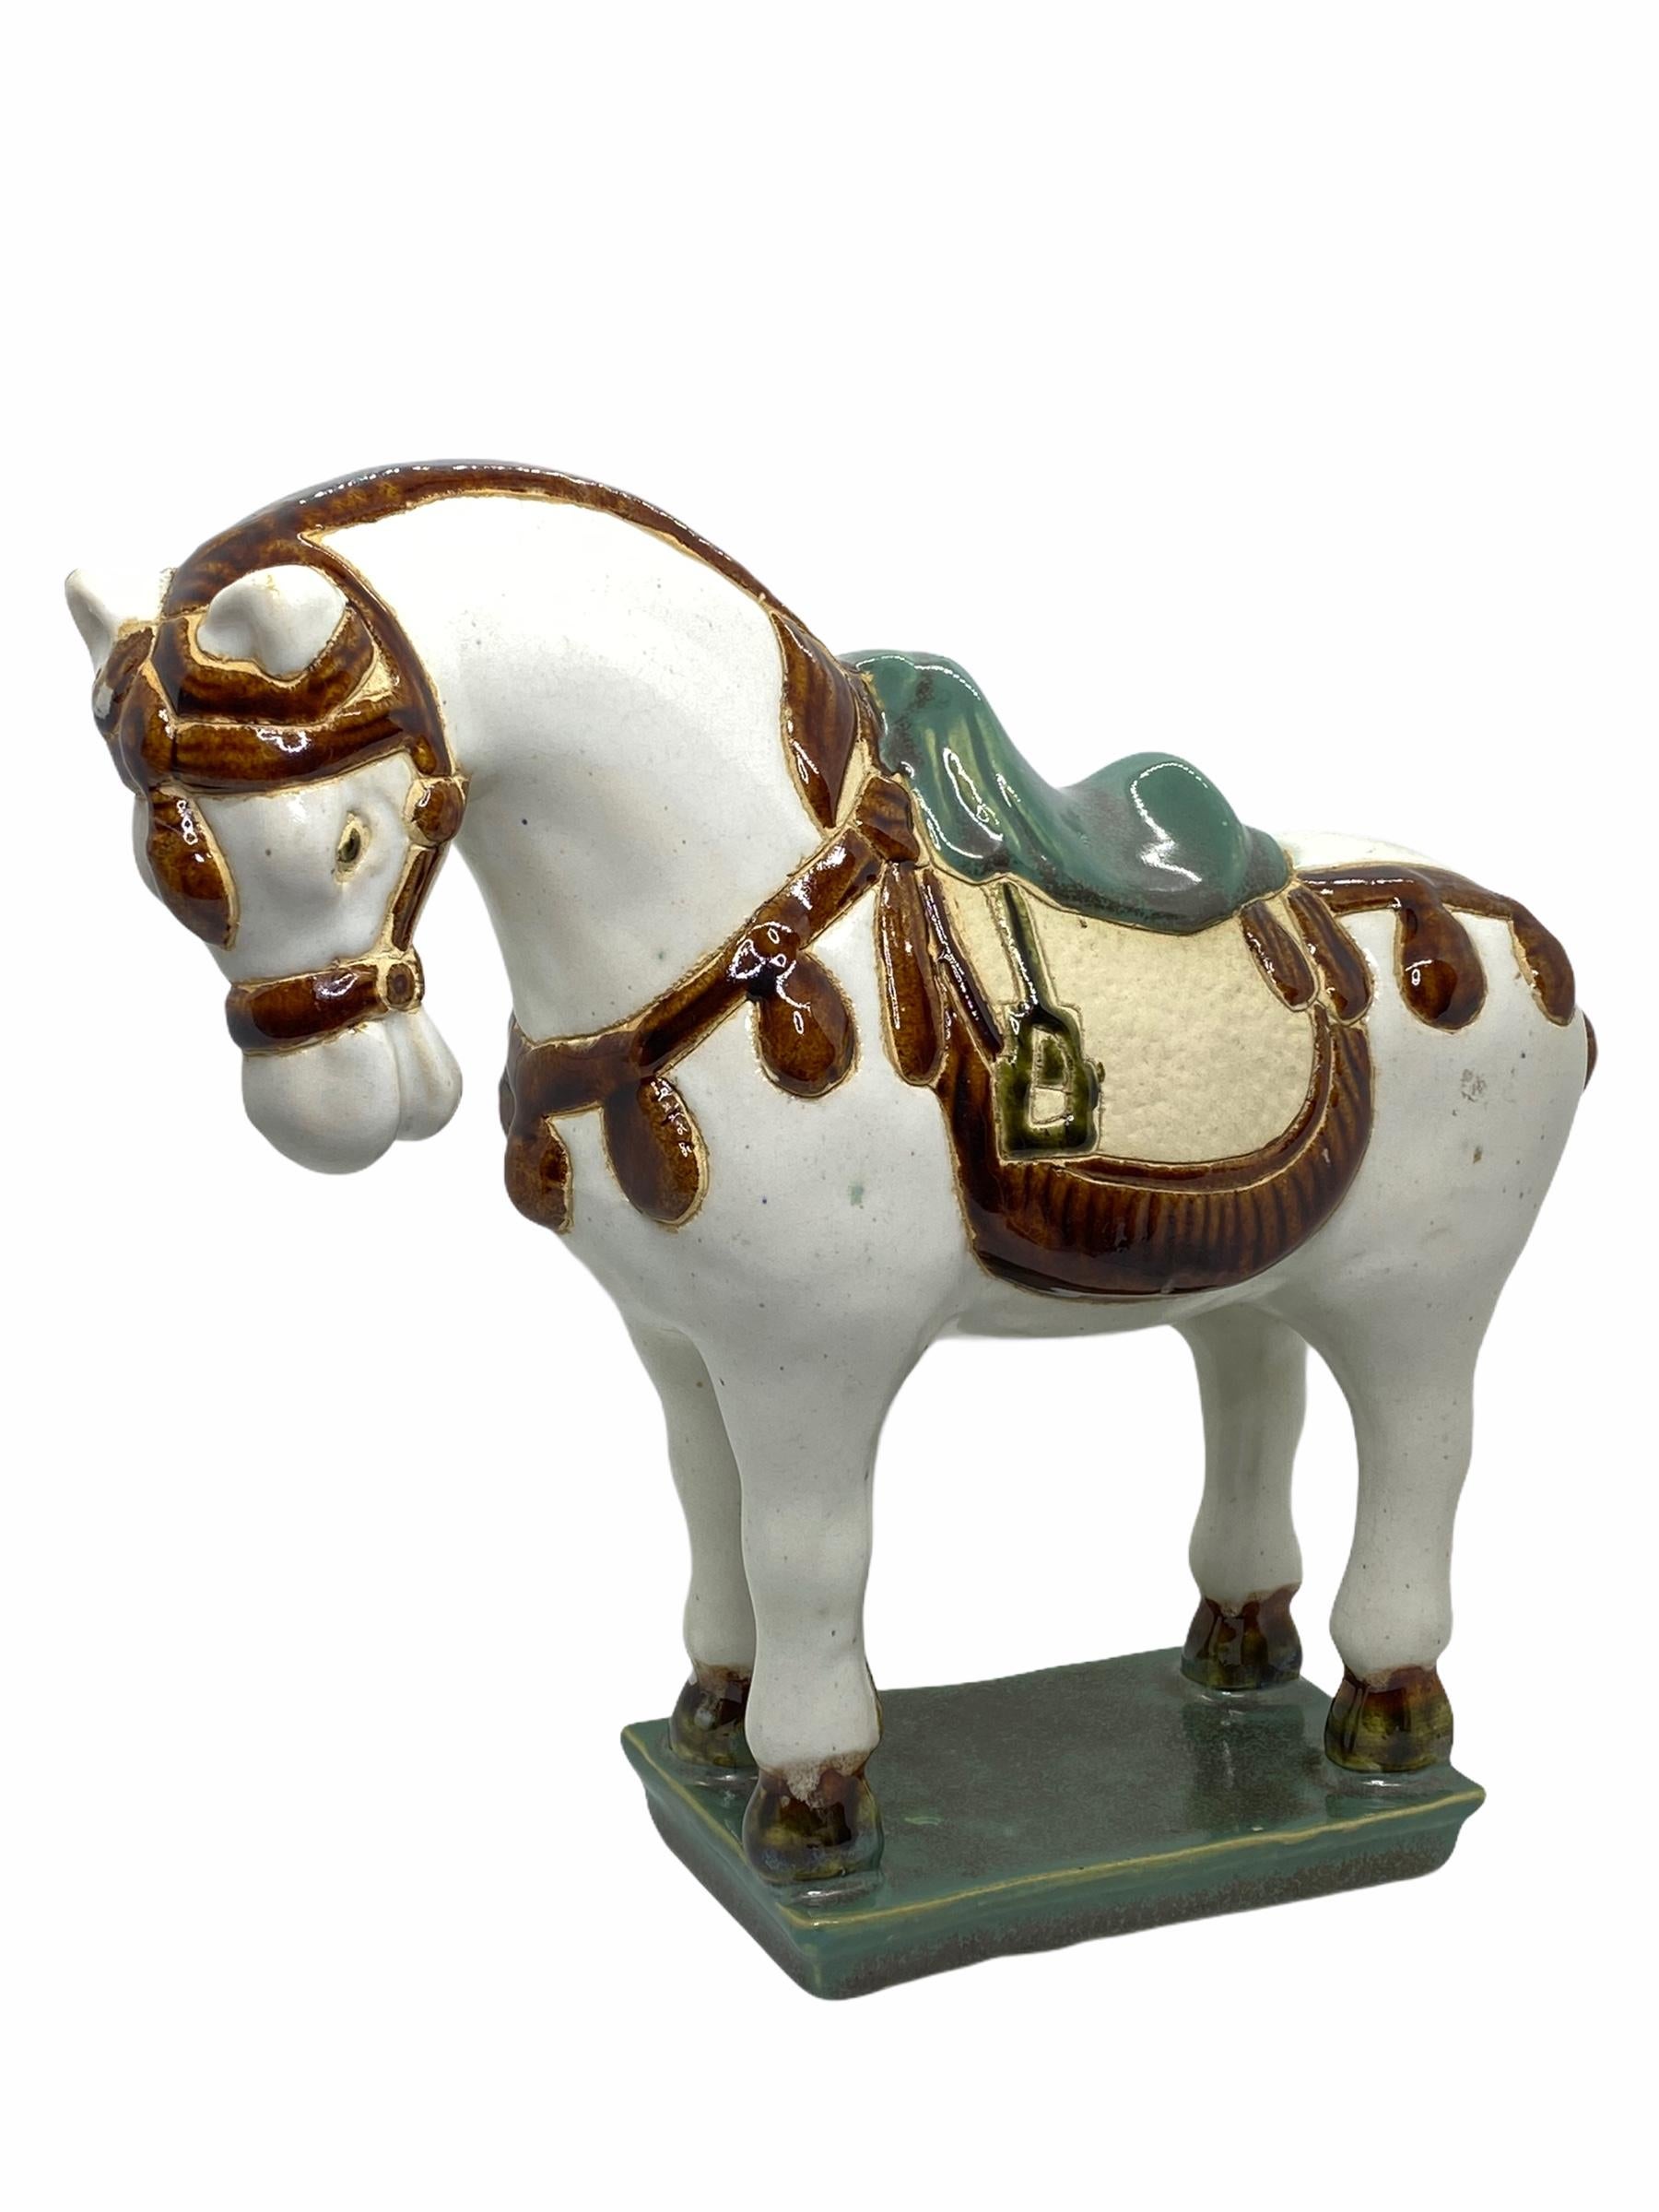 Mid-20th century glazed ceramic Horse. Handmade of ceramic. Nice addition to your home, patio, yard or garden.
   